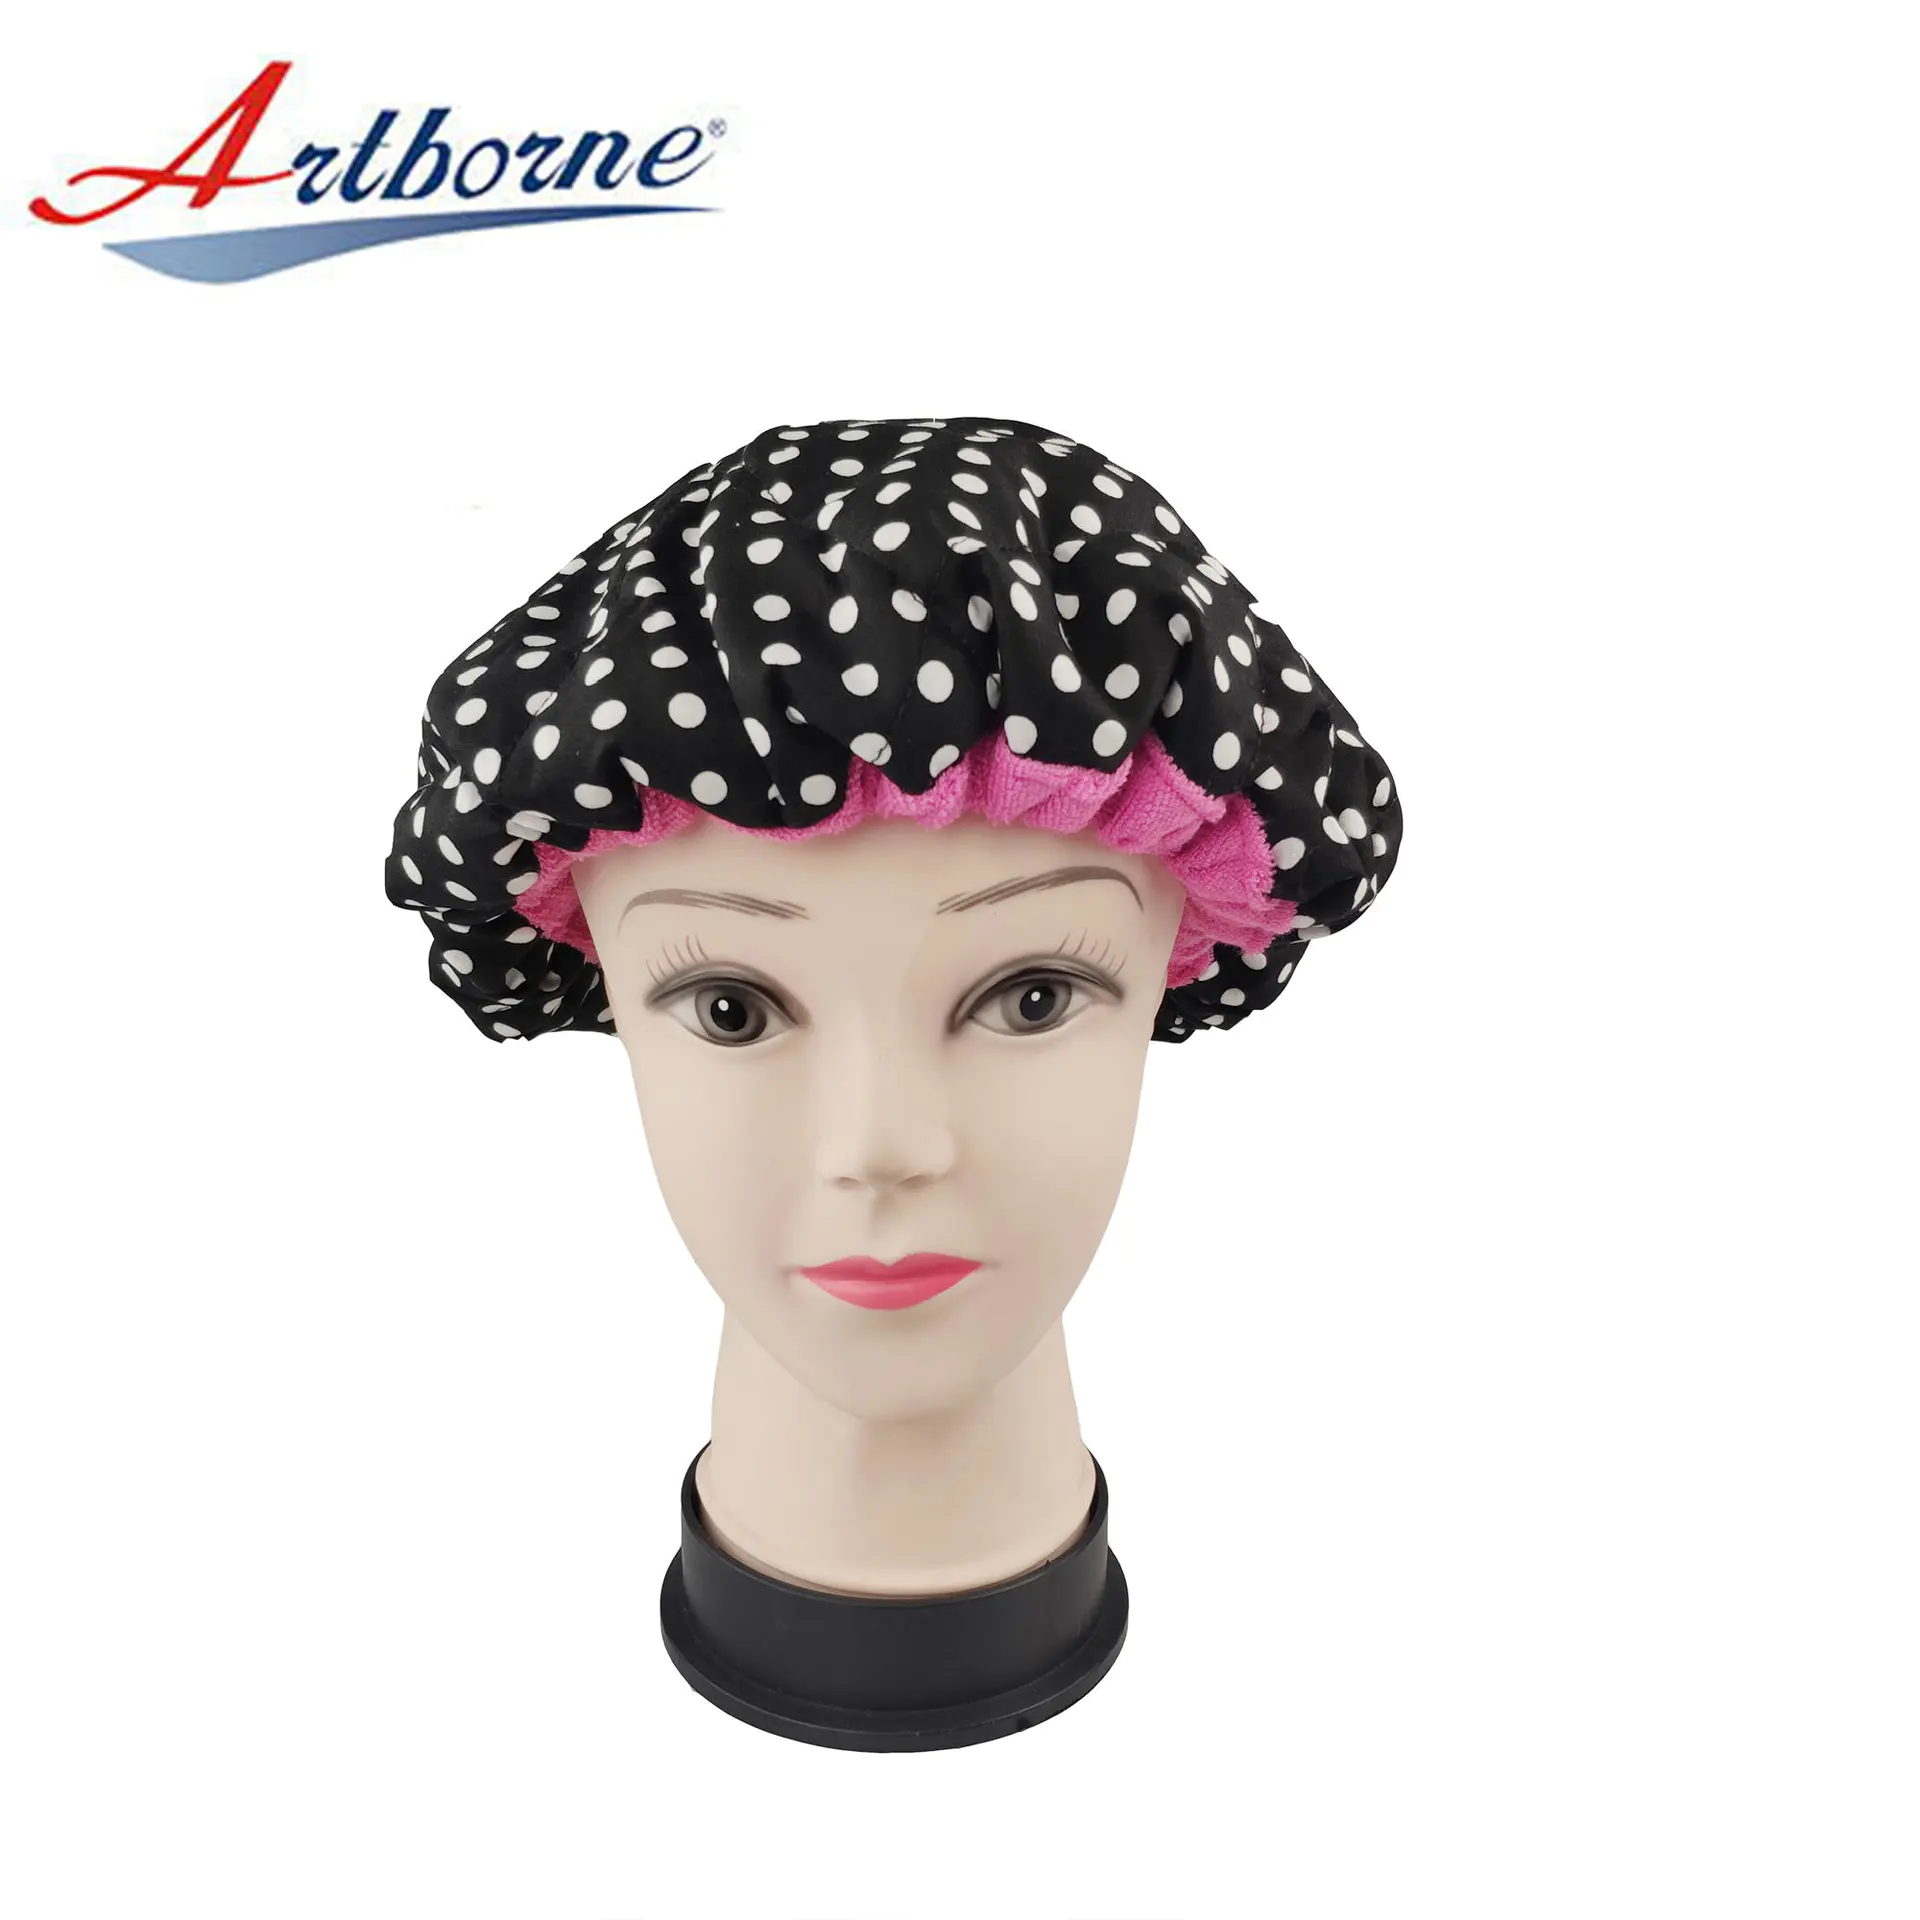 Artborne custom thermal cap for hair treatment and deep conditioning for business for hair-32